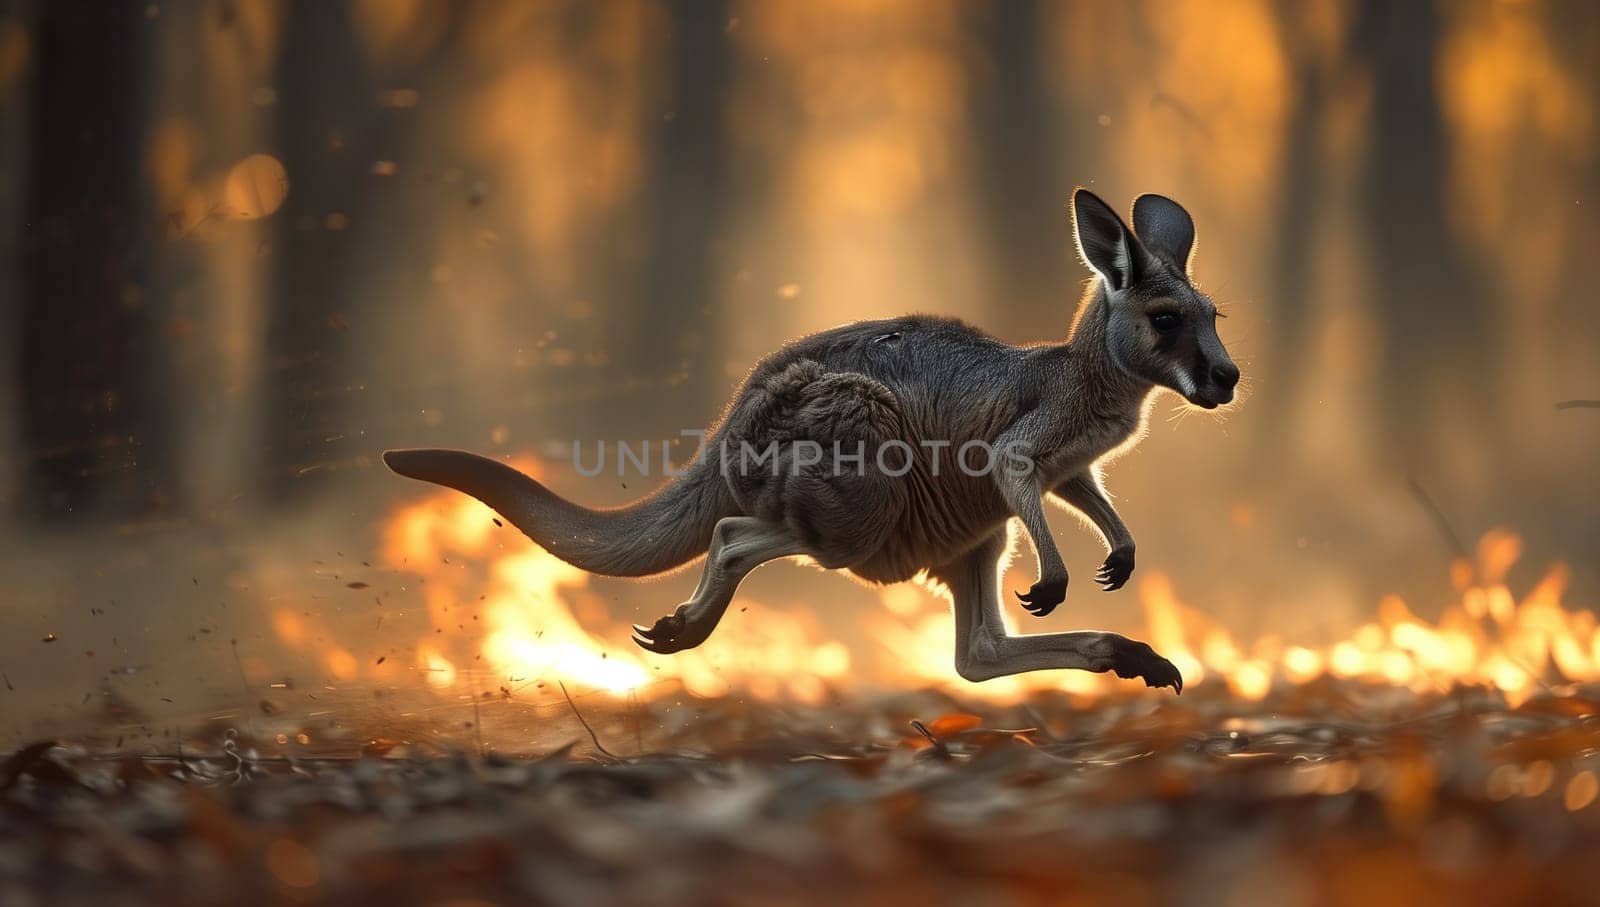 A kangaroo adapts to darkness during a forest fire event by richwolf